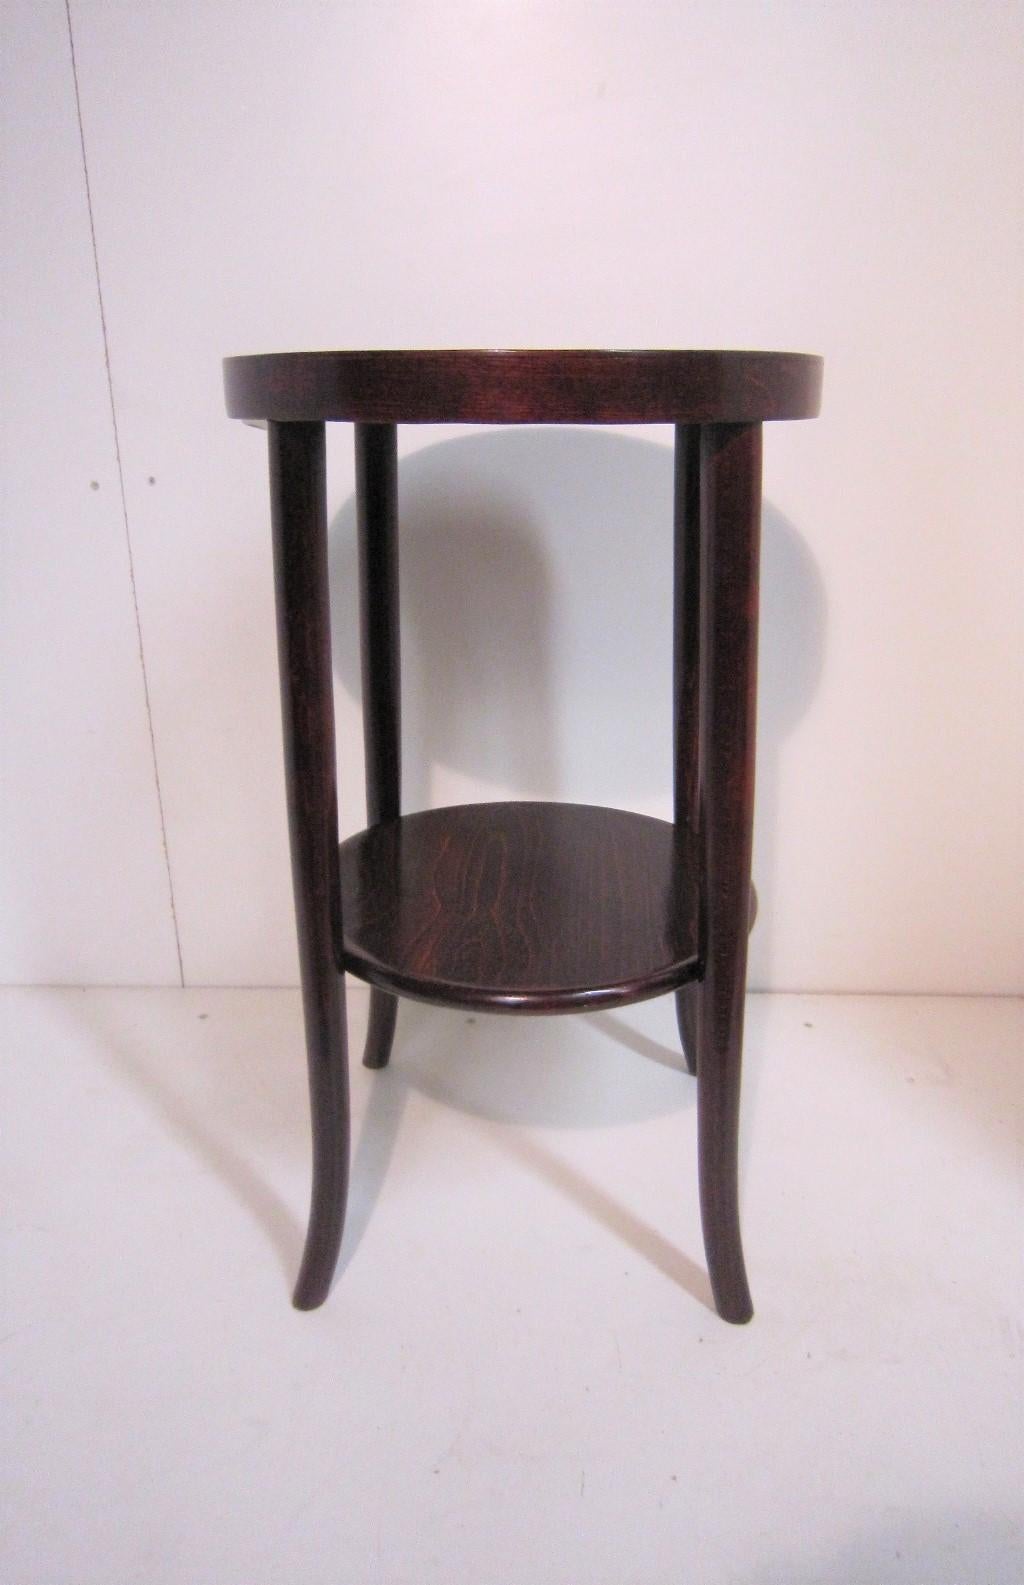 Original Austrian Small Round Bentwood Jungenstil Side Table with Oxblood Finish 7